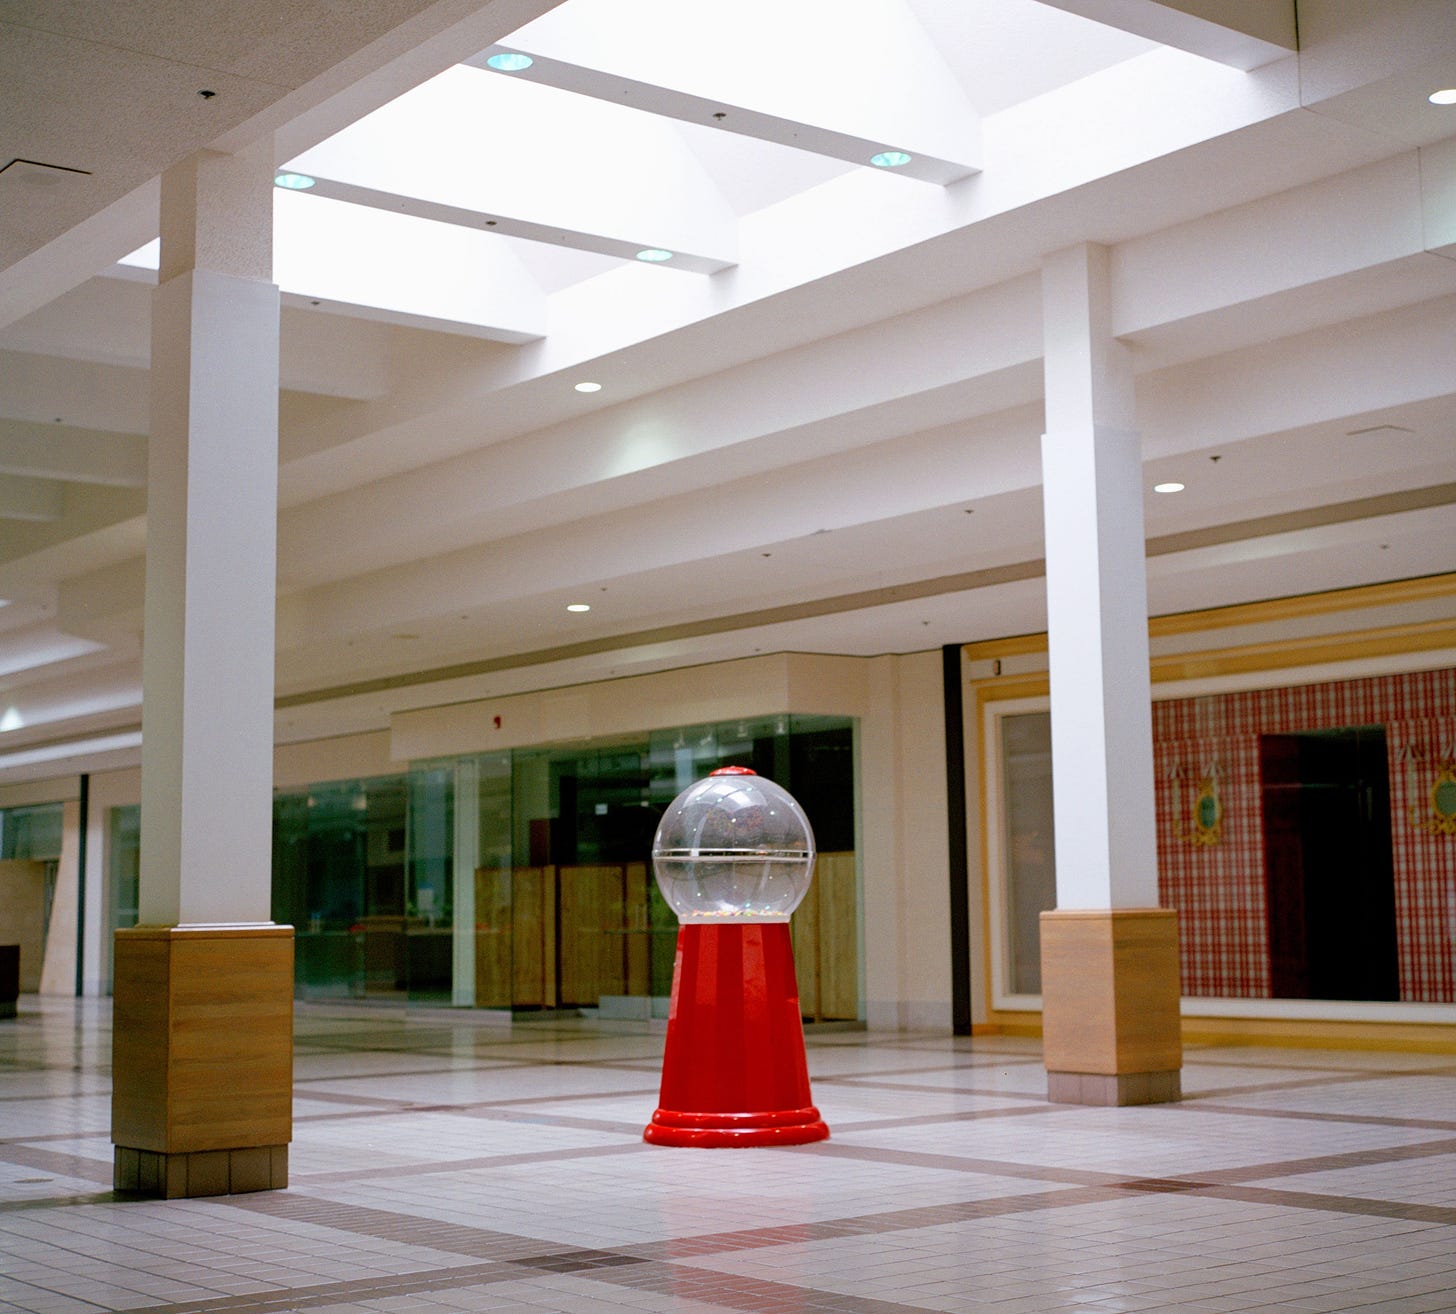 A large empty gumball machine sits in the corridor of a deserted mall.